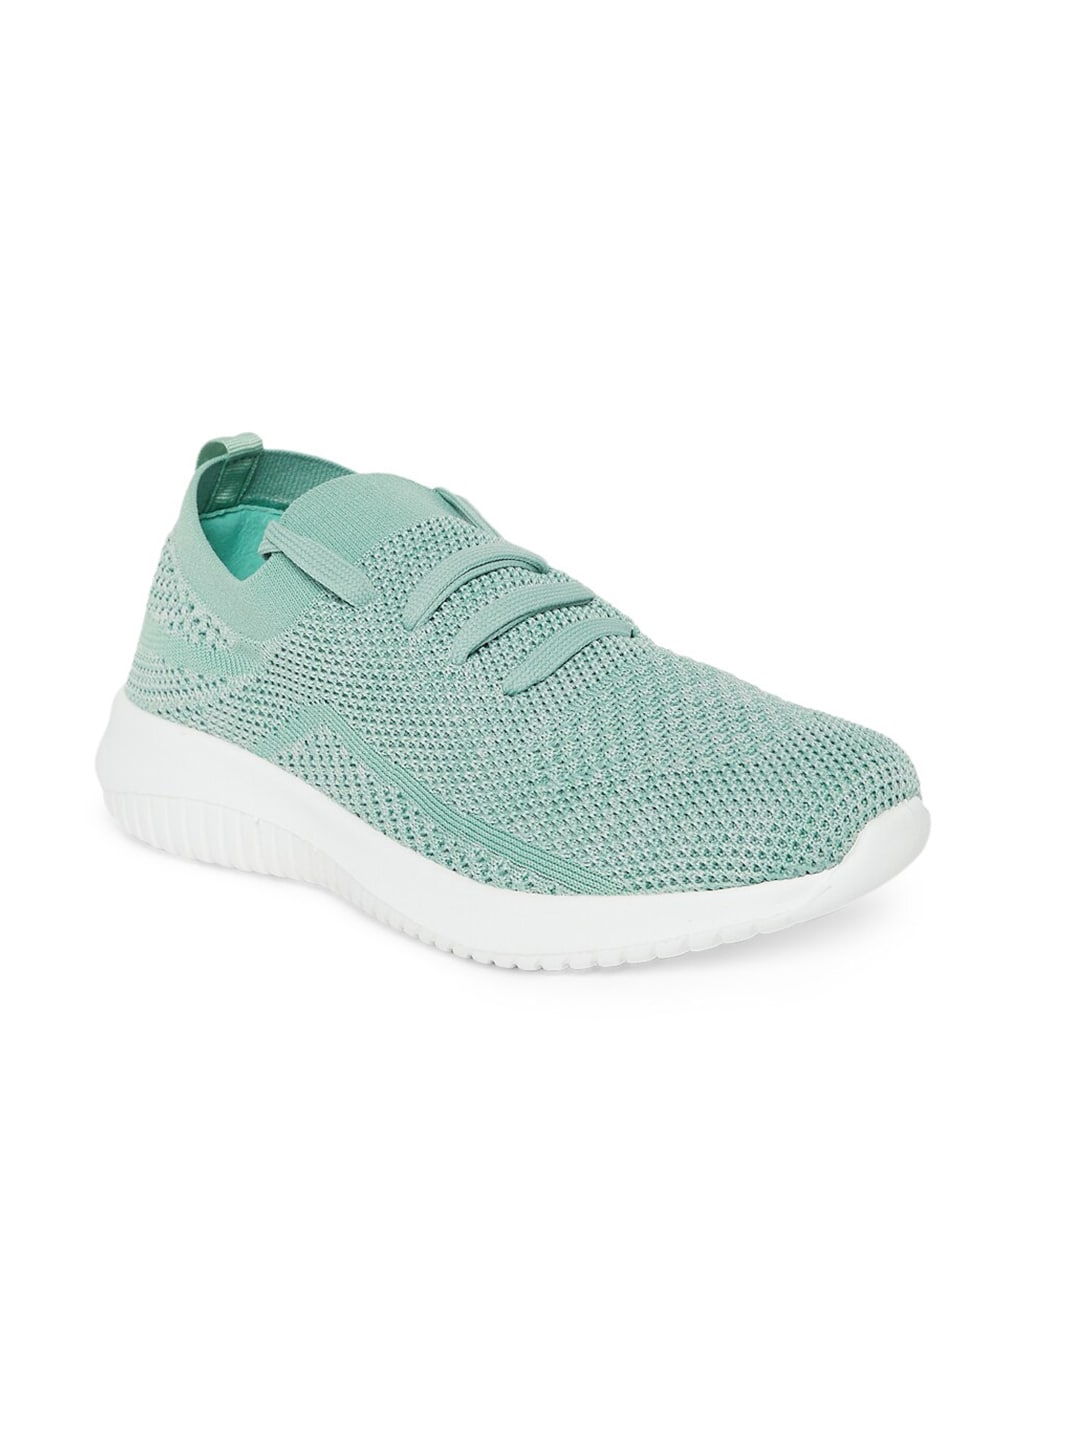 Forever Glam by Pantaloons Women Green Textile Running Non-Marking Shoes Price in India